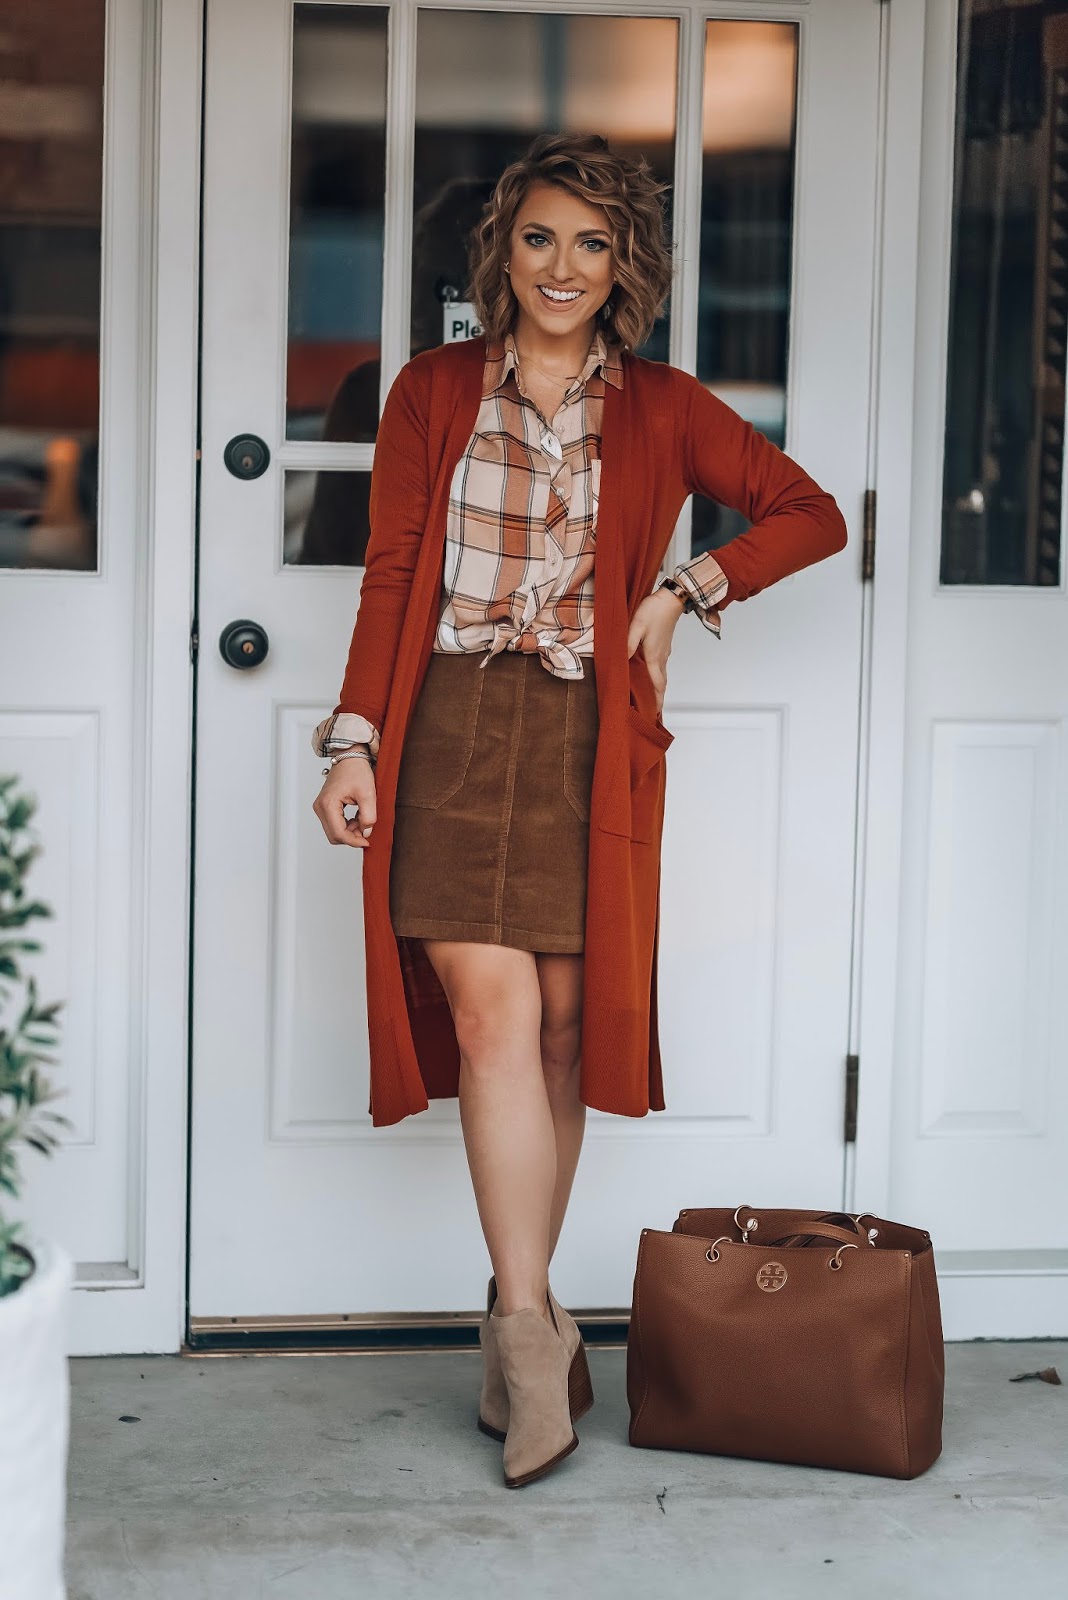 The Perfect Plaid Button Down With Longline Cardigan (both under $30) & Cord Skirt - Something Delightful Blog #fallstyle #targetstyle #fallfashion #affordablestyle